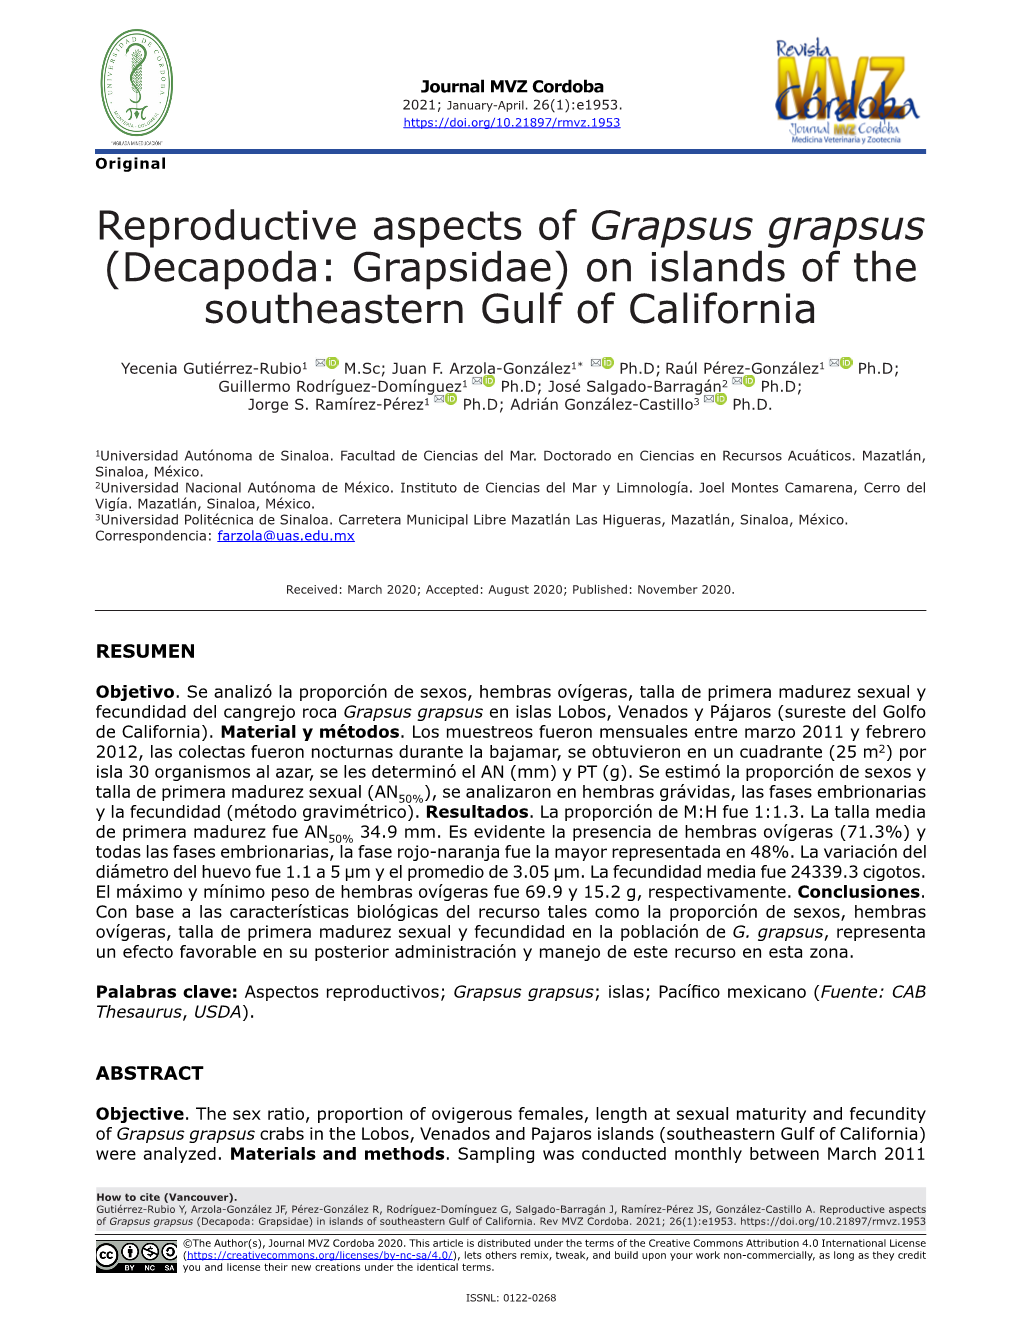 Reproductive Aspects of Grapsus Grapsus (Decapoda: Grapsidae) in Islands of Southeastern Gulf of California